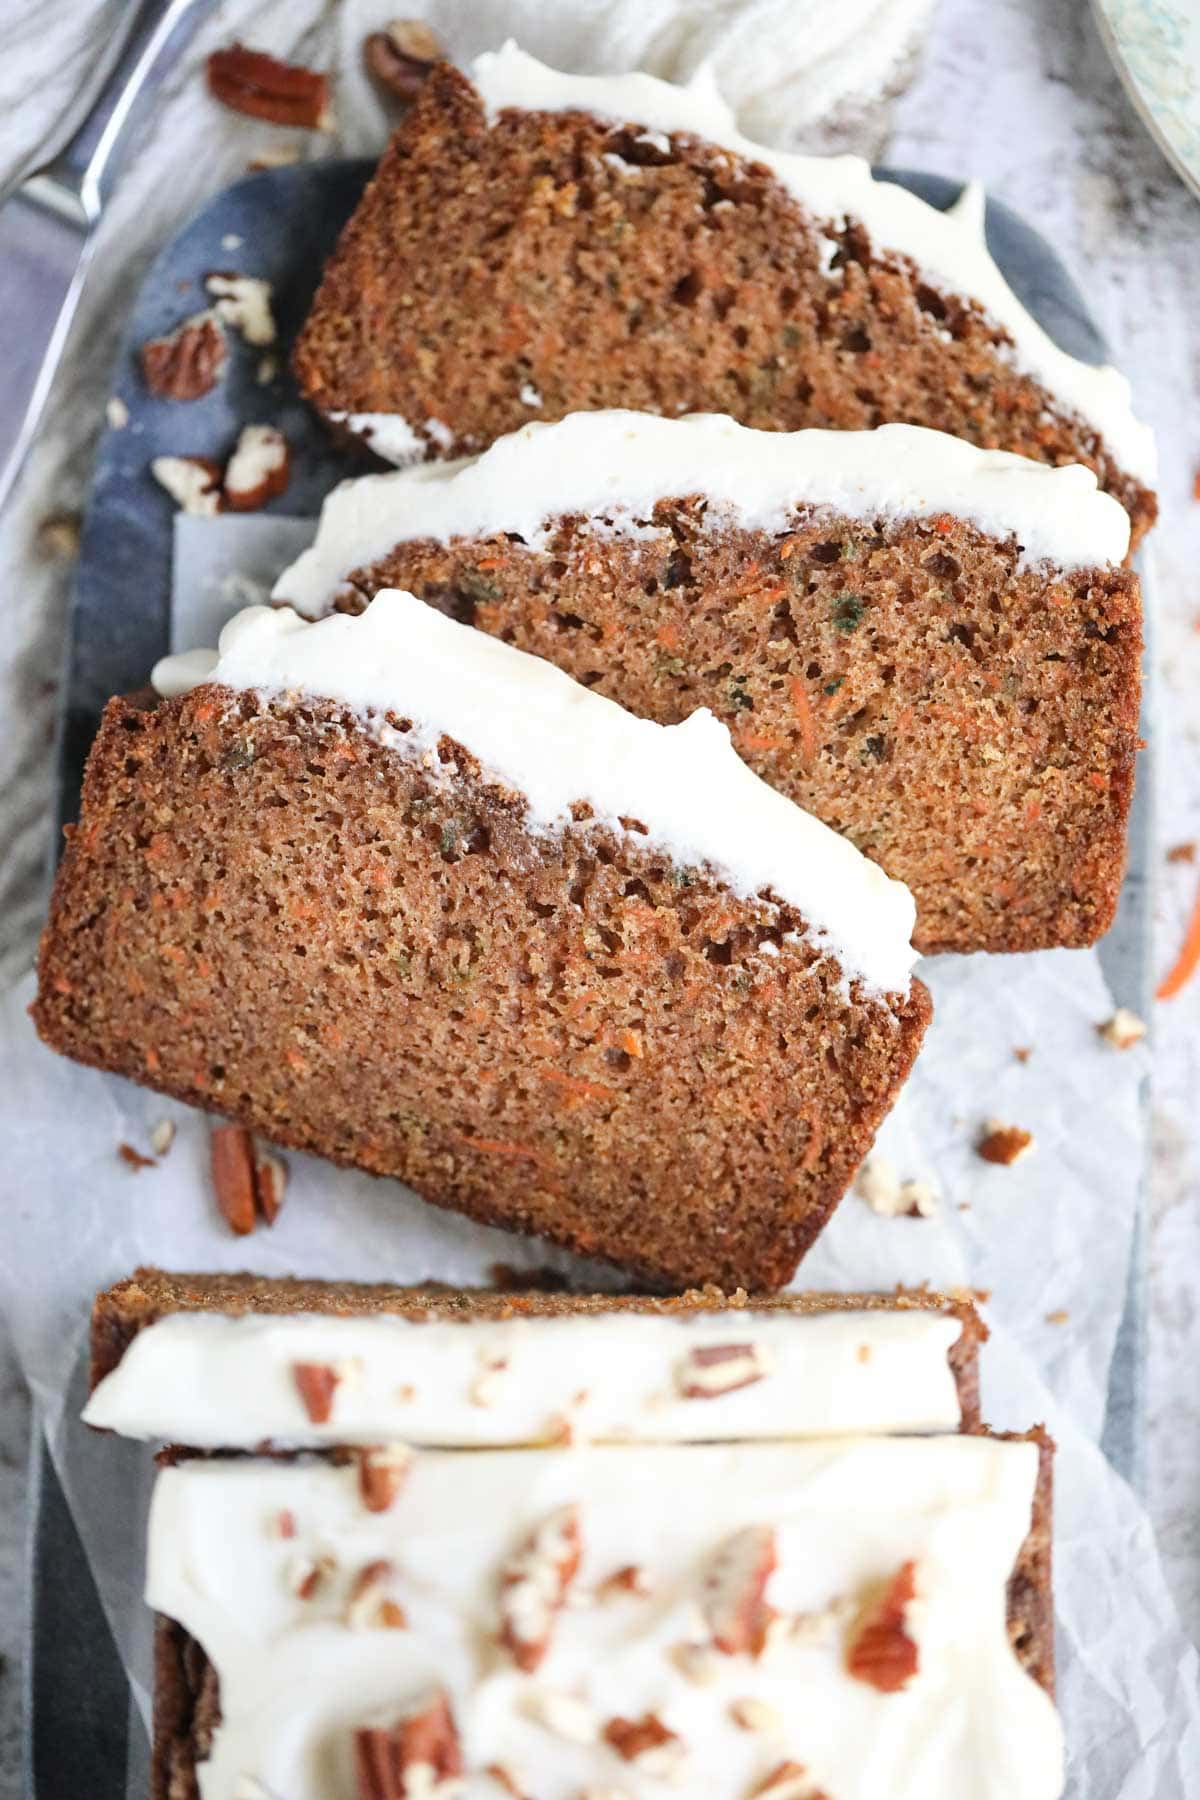 Sliced carrot cake on a marble cutting board.